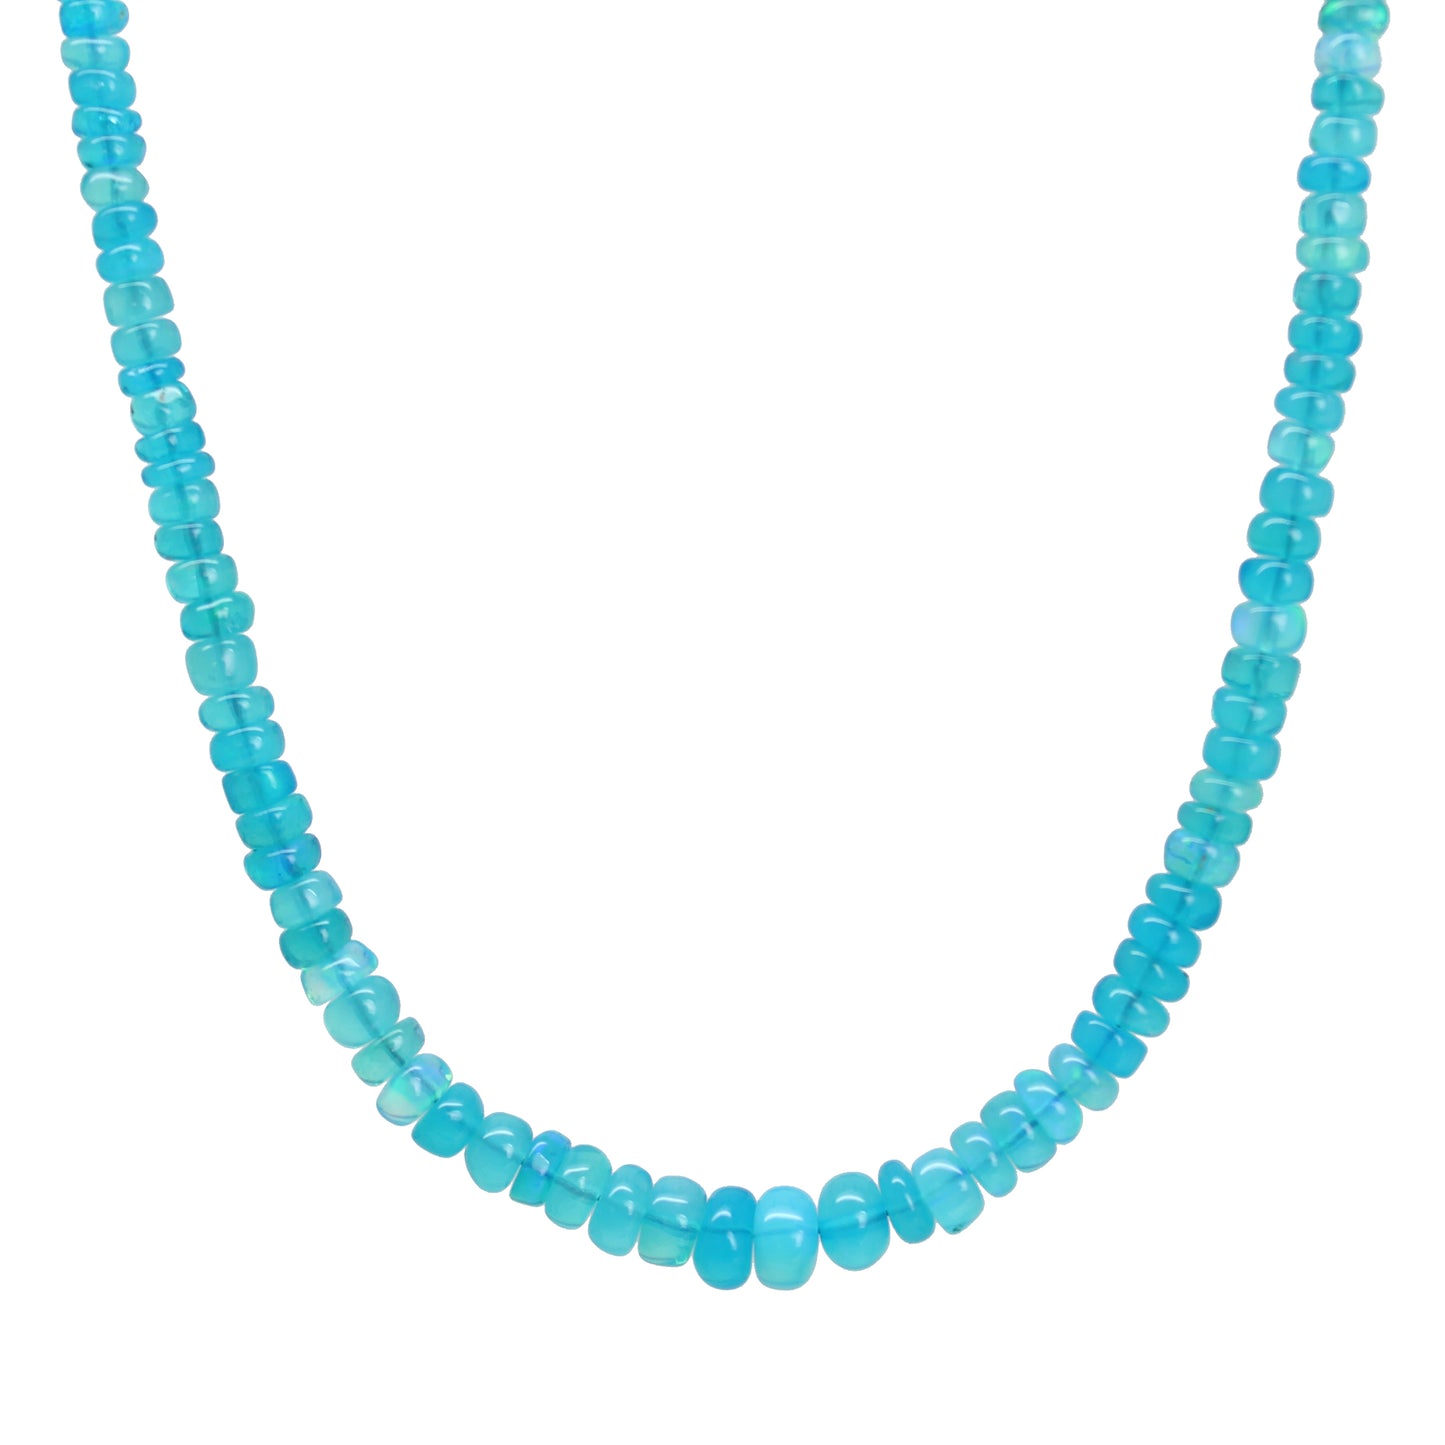 Blue Opal Necklace, 16.5 Inches Long